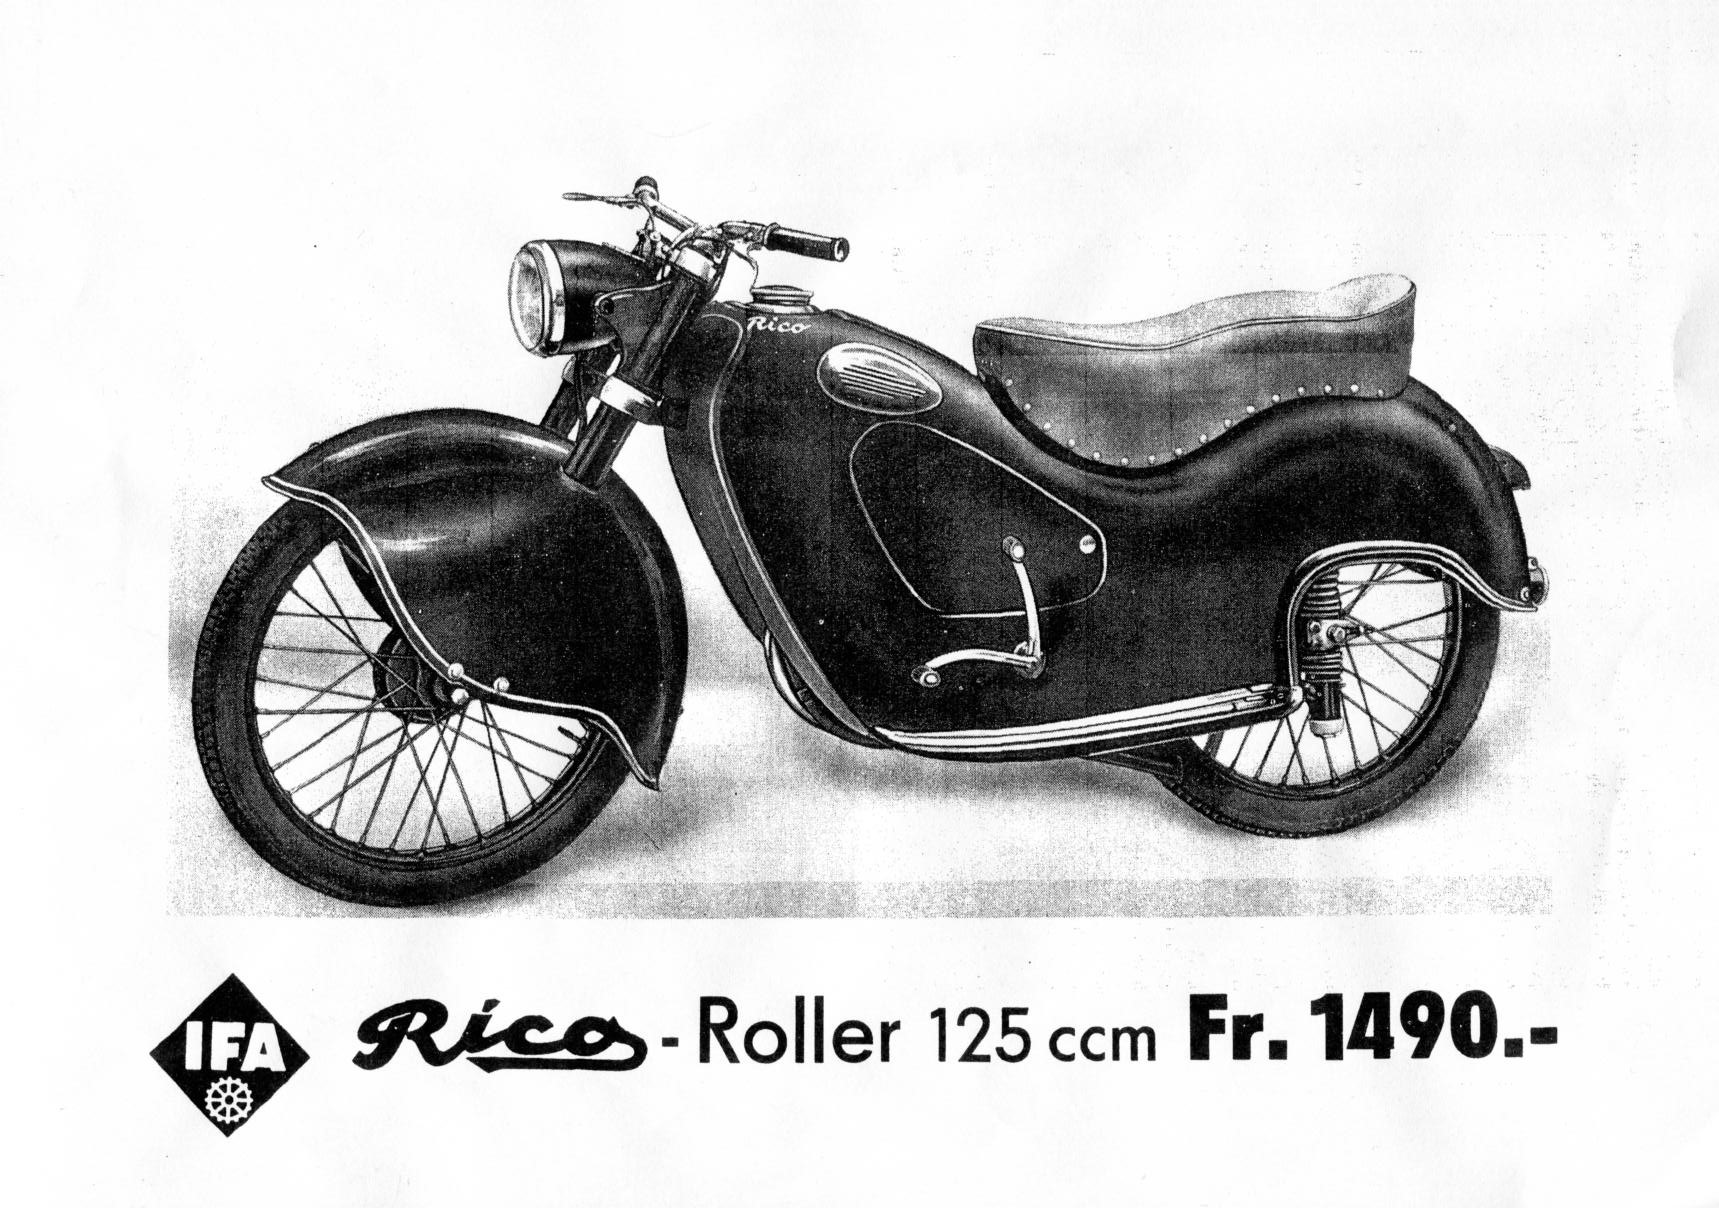 RICO Roller 1-page-001.jpg